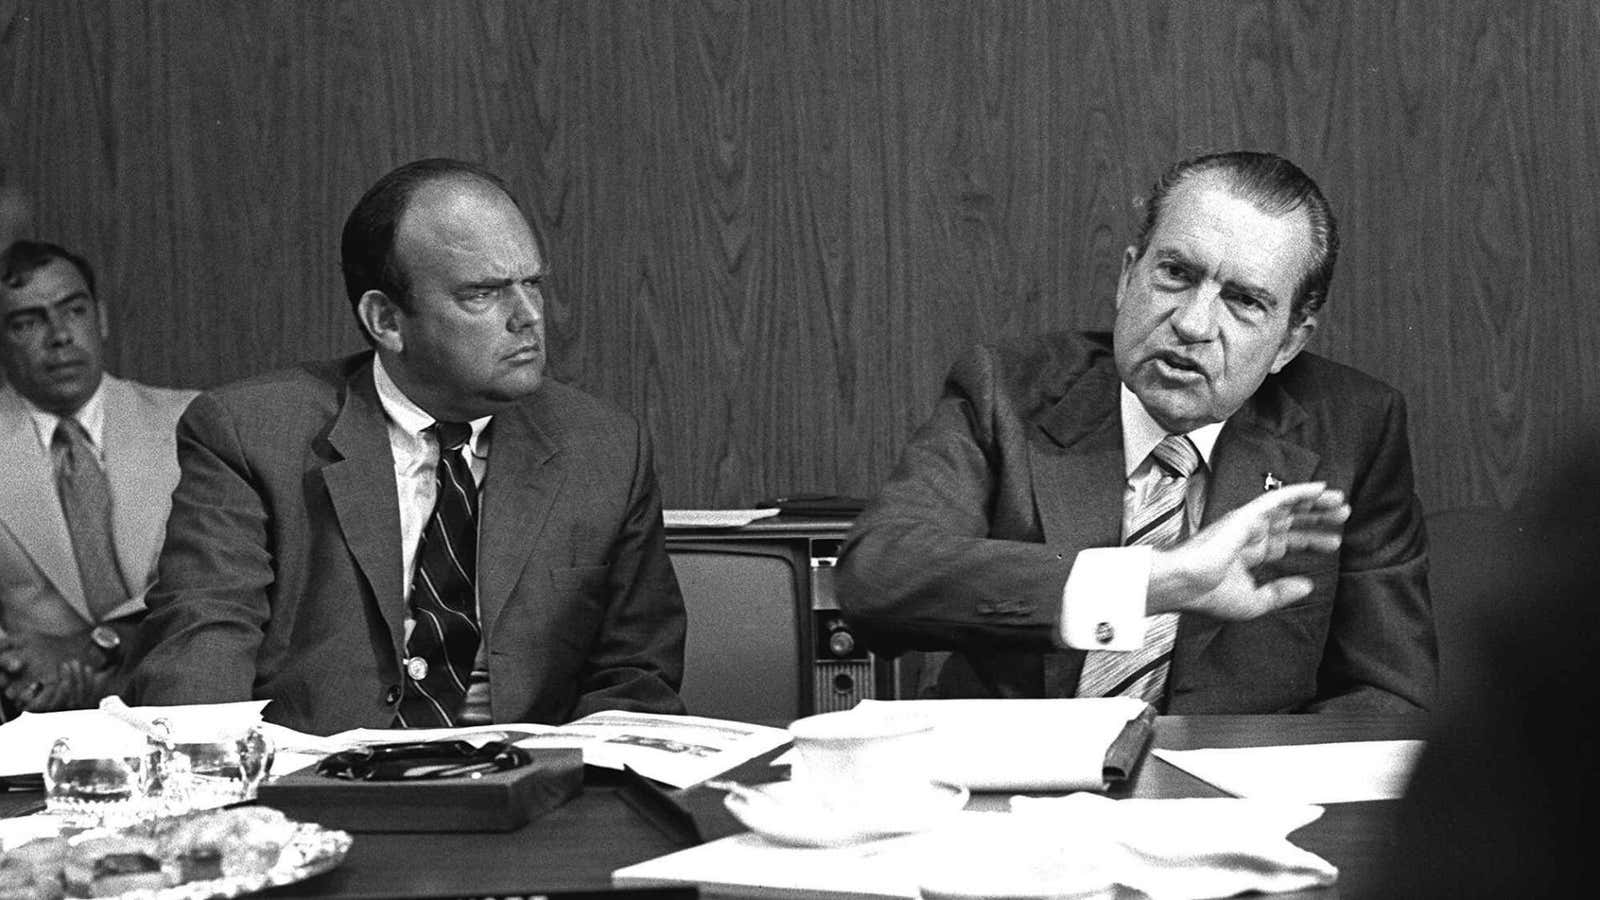 Nixon discouraged NIMH from researching racism as a public health issue